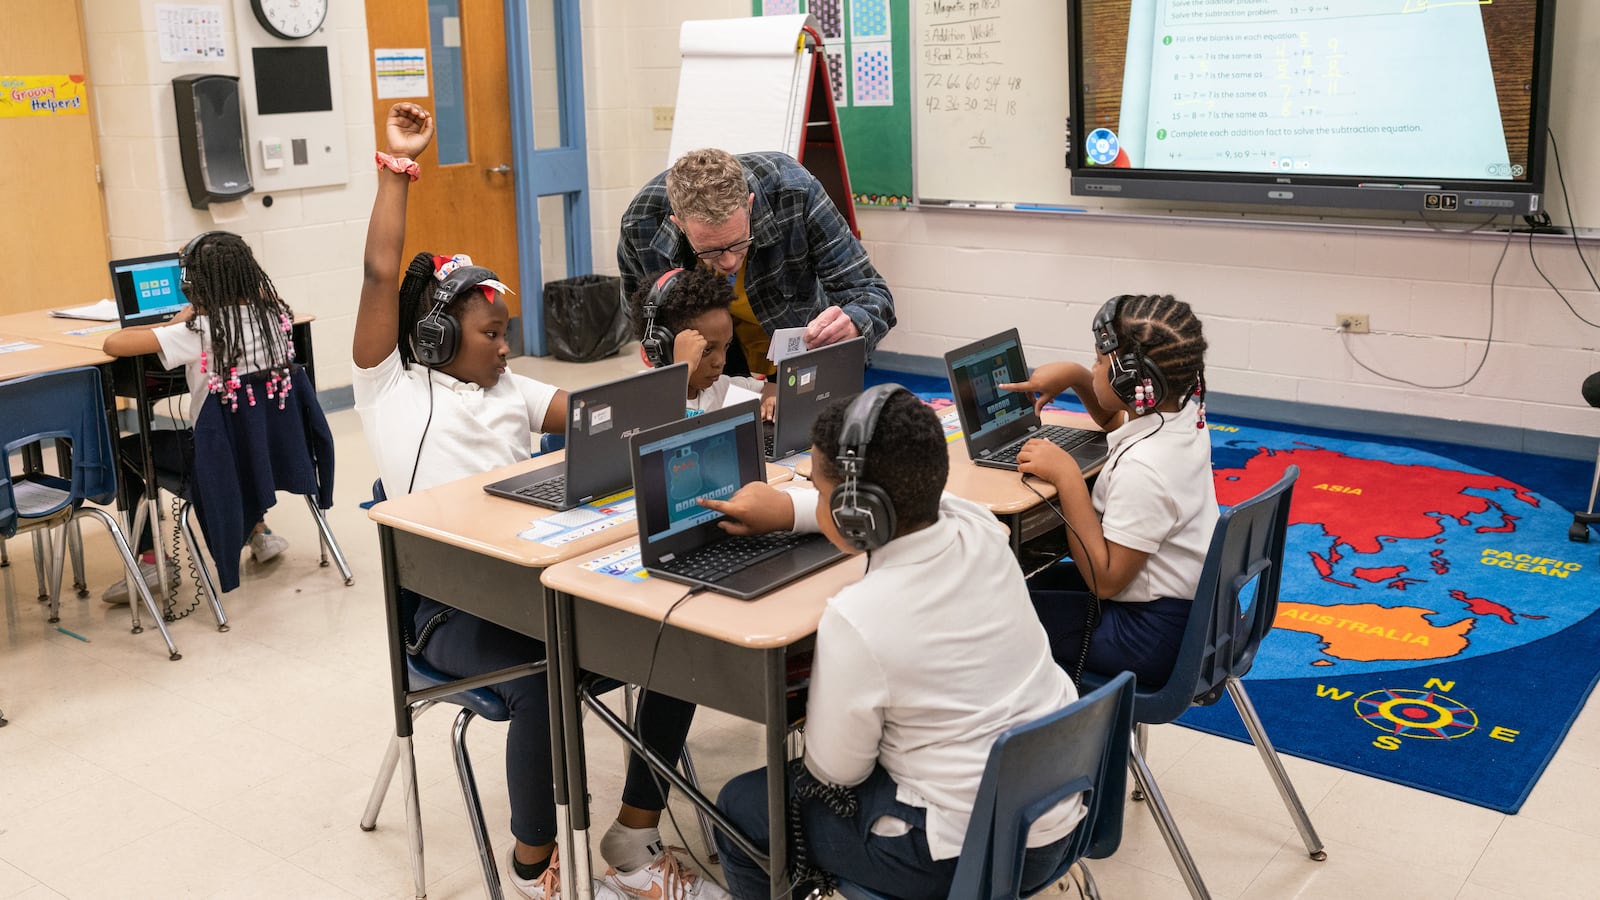 A teacher helps his students as they work on their computers in the classroom.